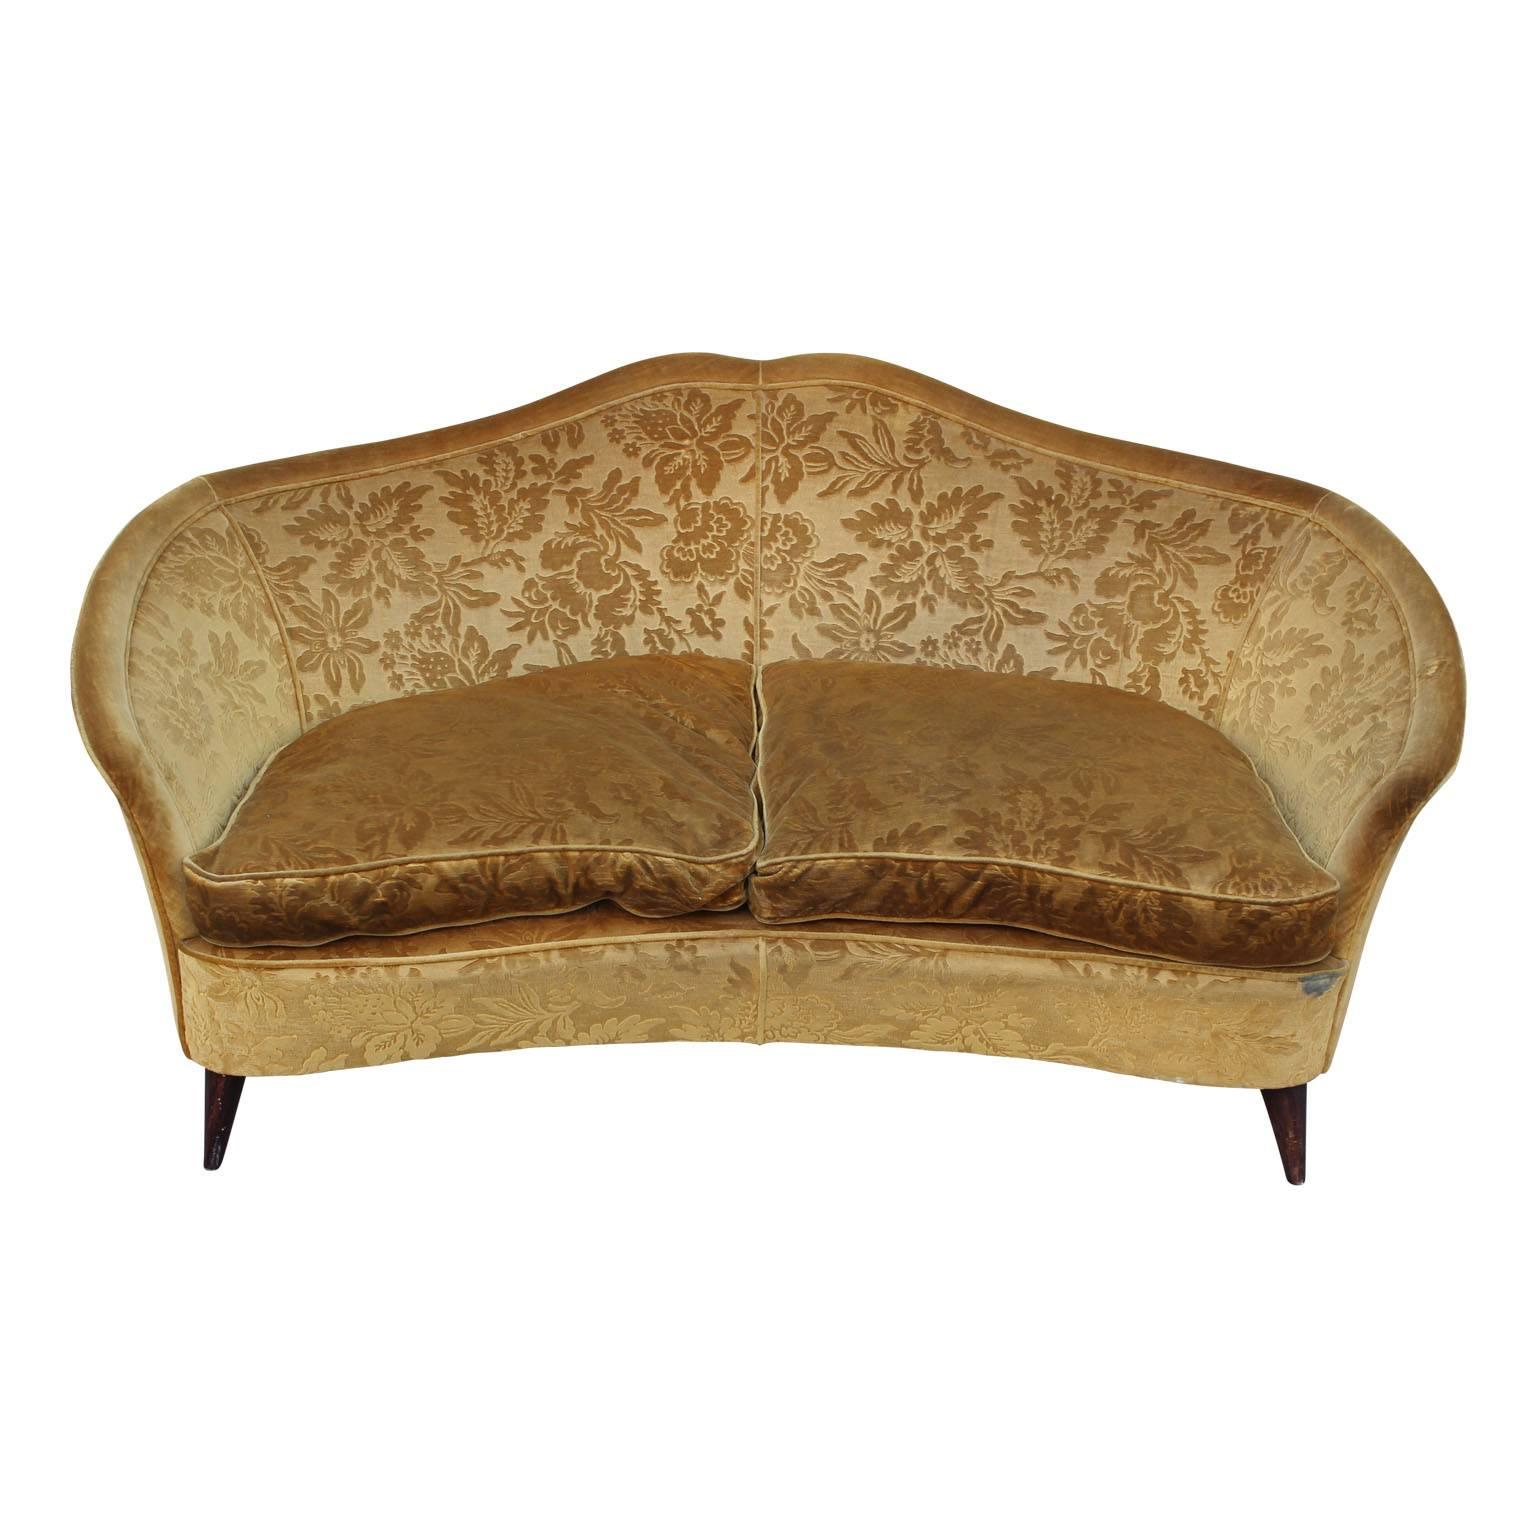 Refined Italian love seat from the 1950s in its original gold floral velvet. Sure to add a touch sophistication to any home or lobby. Matching lounge chairs available as well.